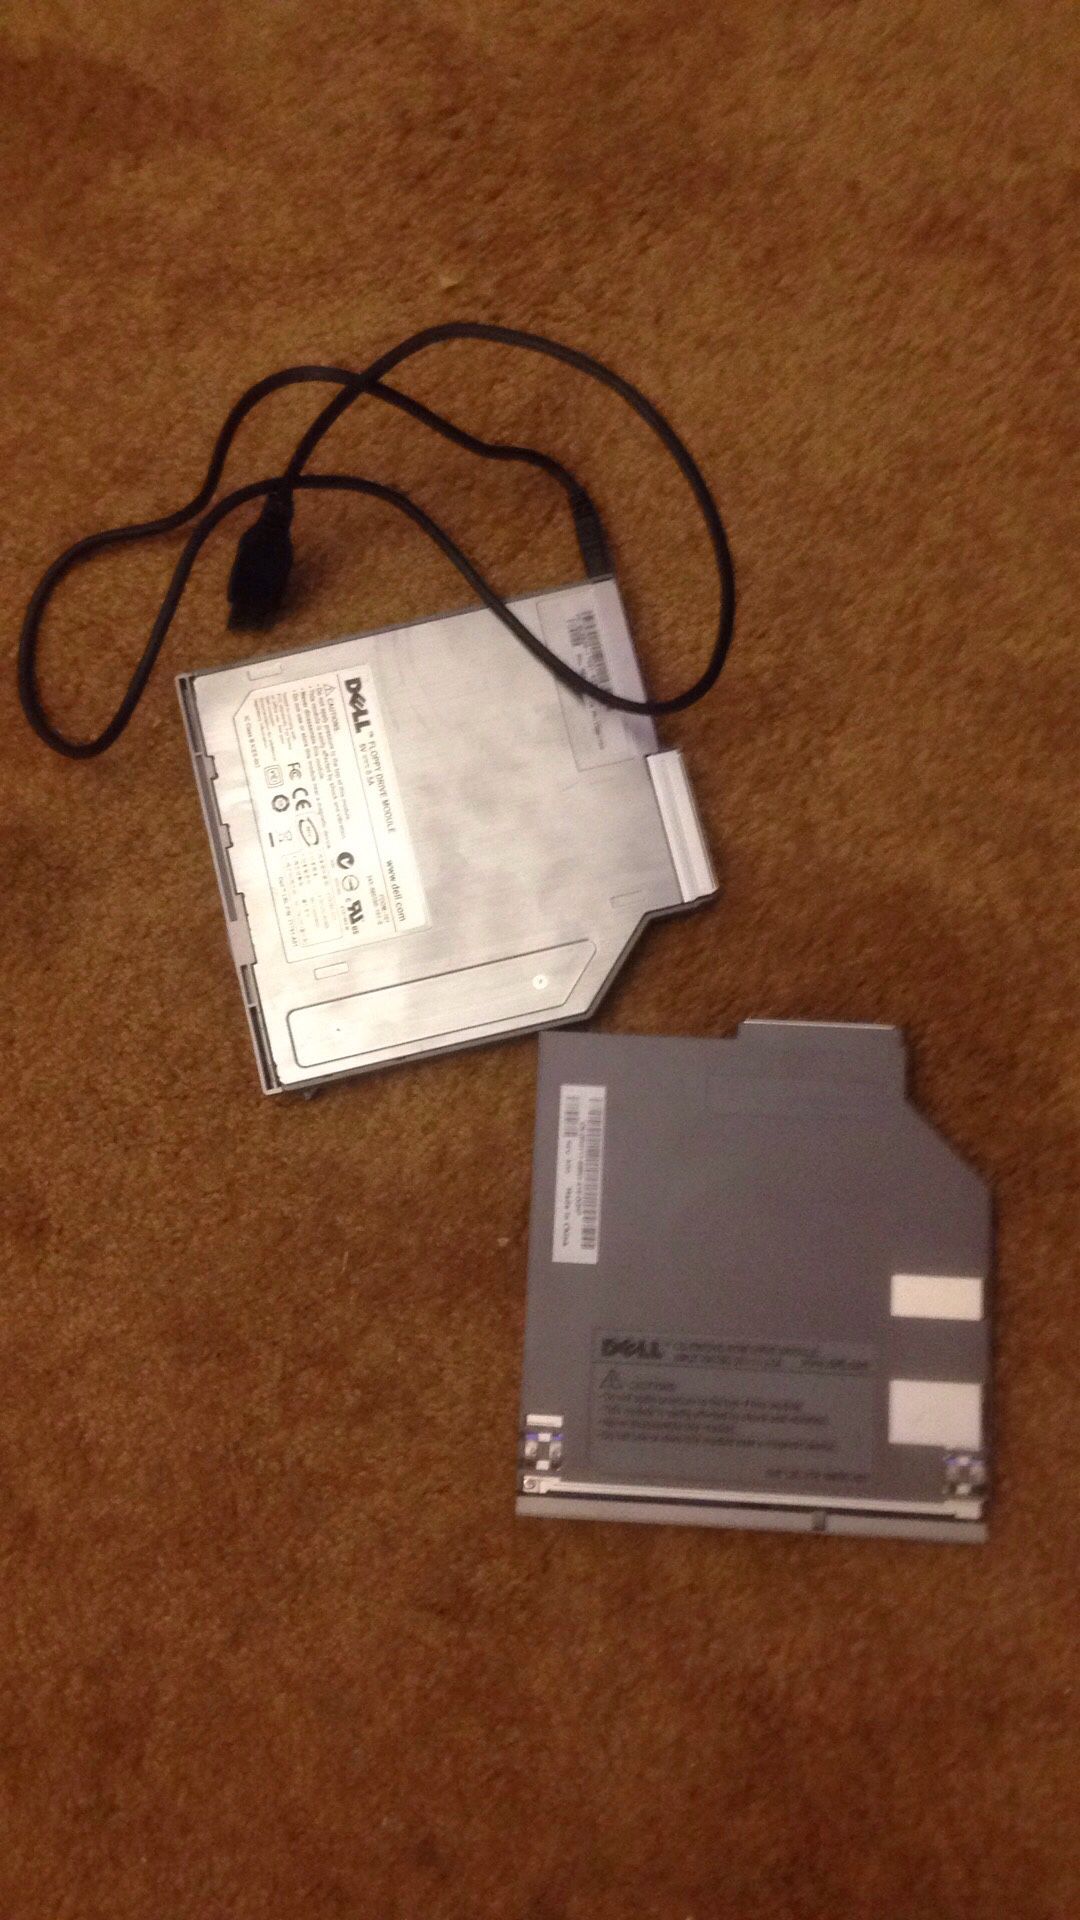 Floppy disk drive and DVD rom